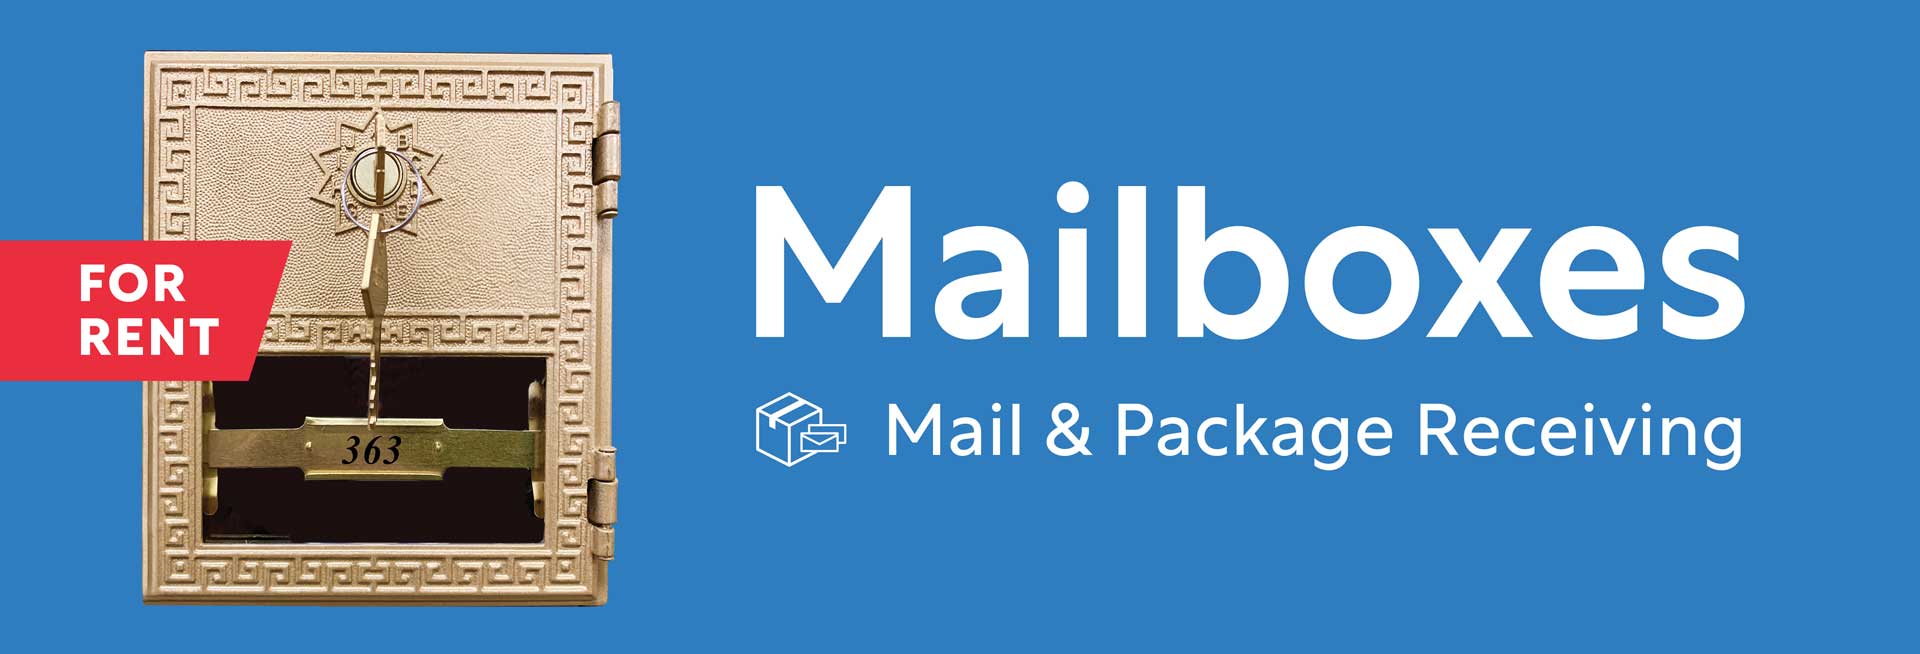 Mailboxes - Mail & Package Receiving